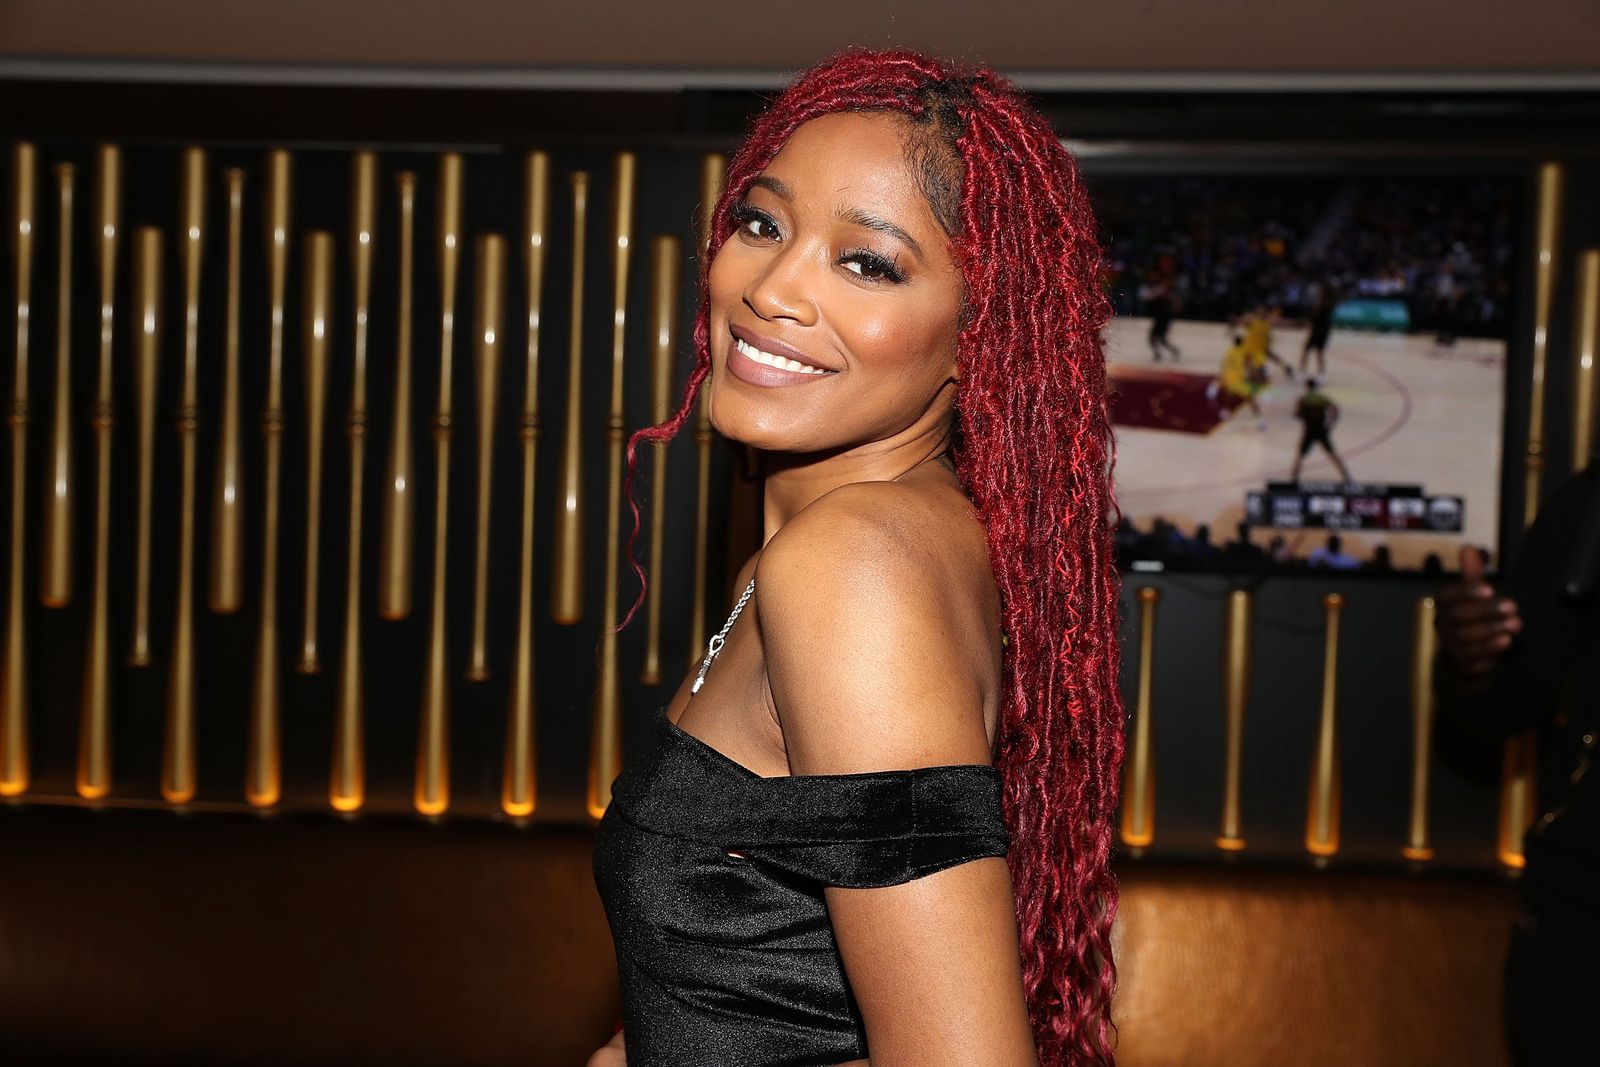 Keke Palmer at her listening party at the 40/40 club in 2018 | Photo: Getty Images